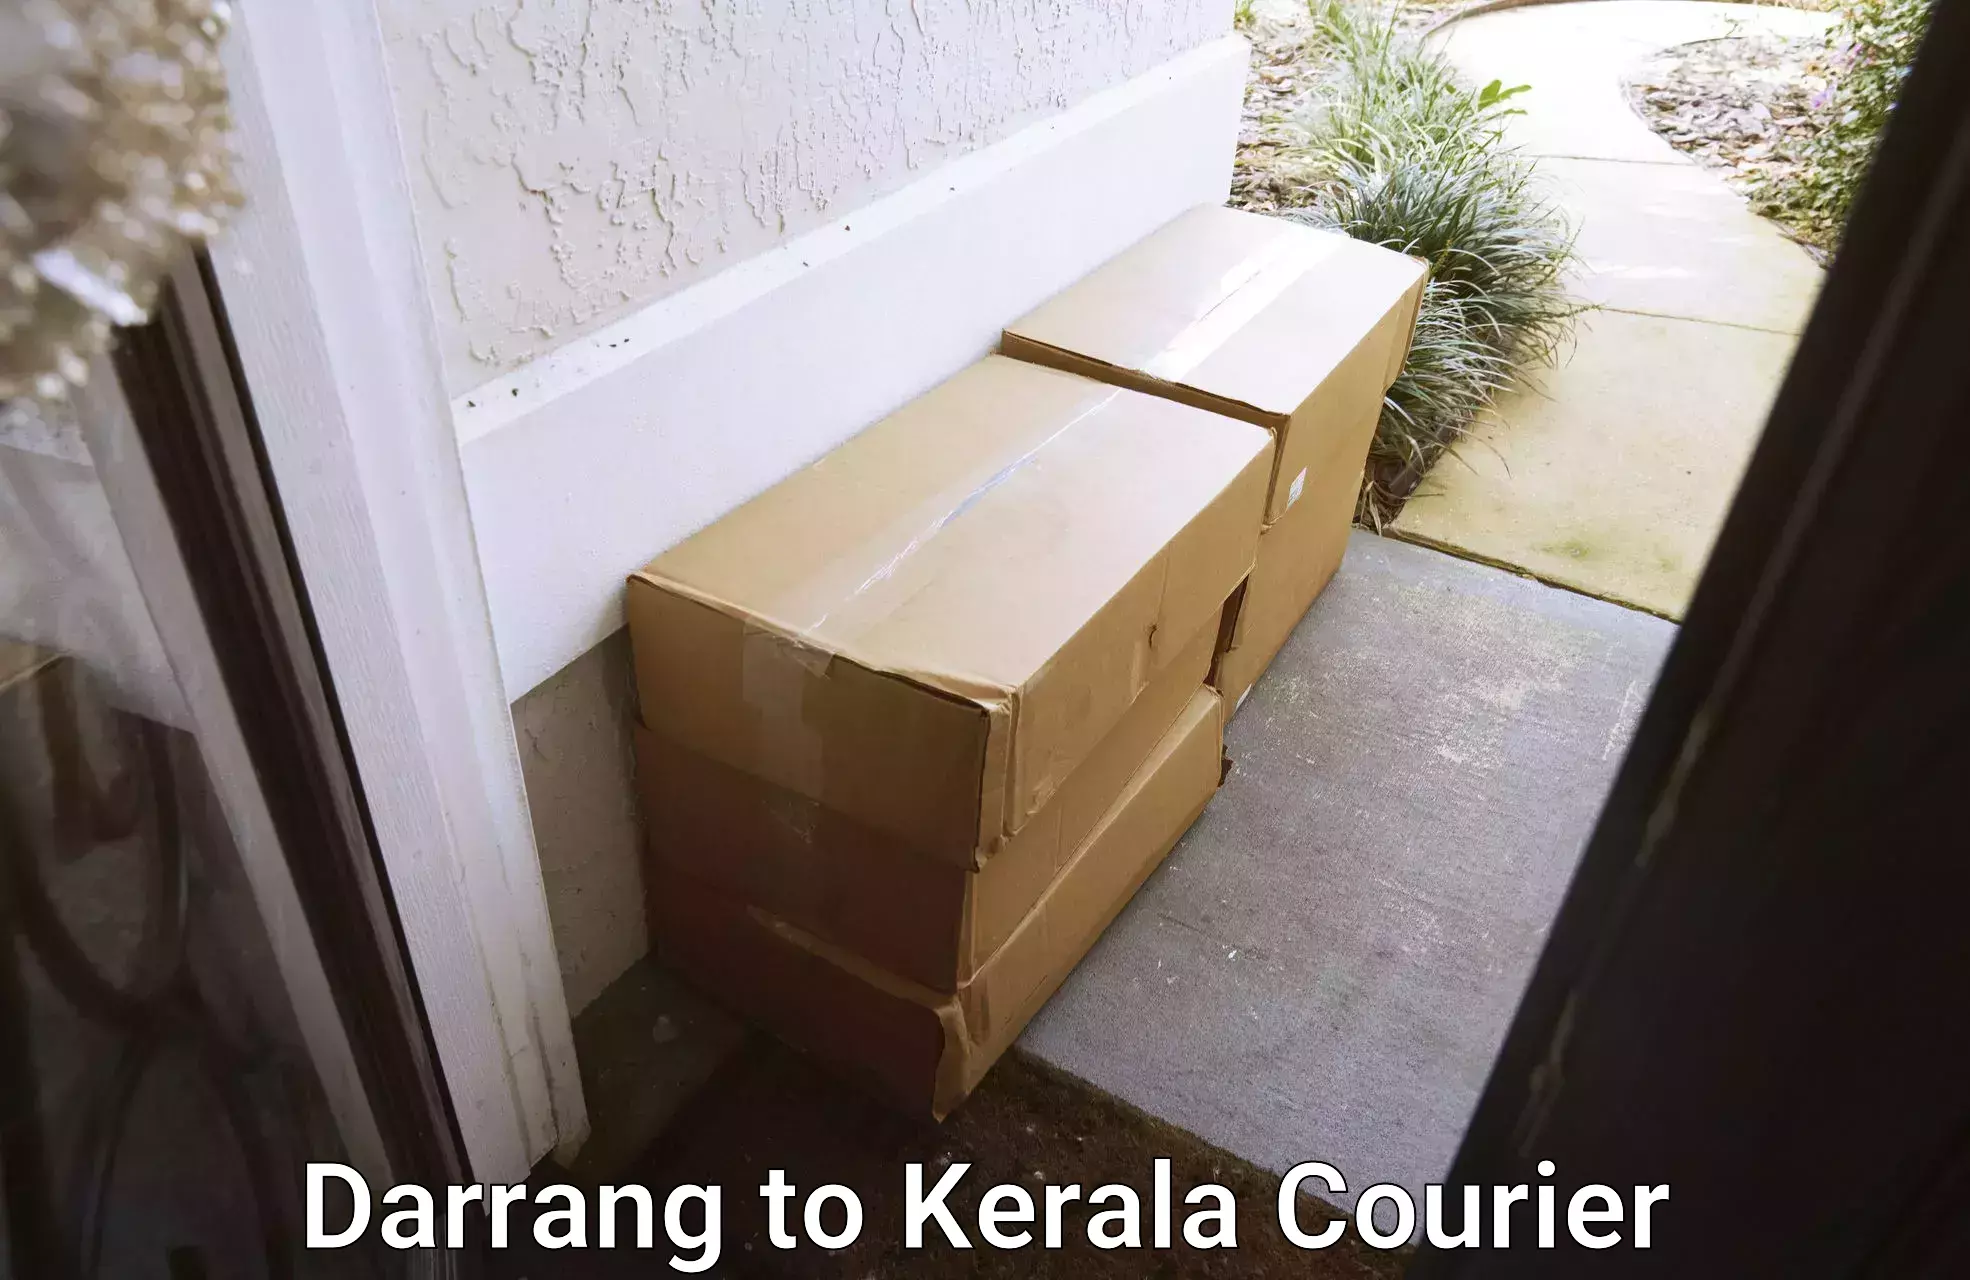 Multi-national courier services Darrang to Trivandrum